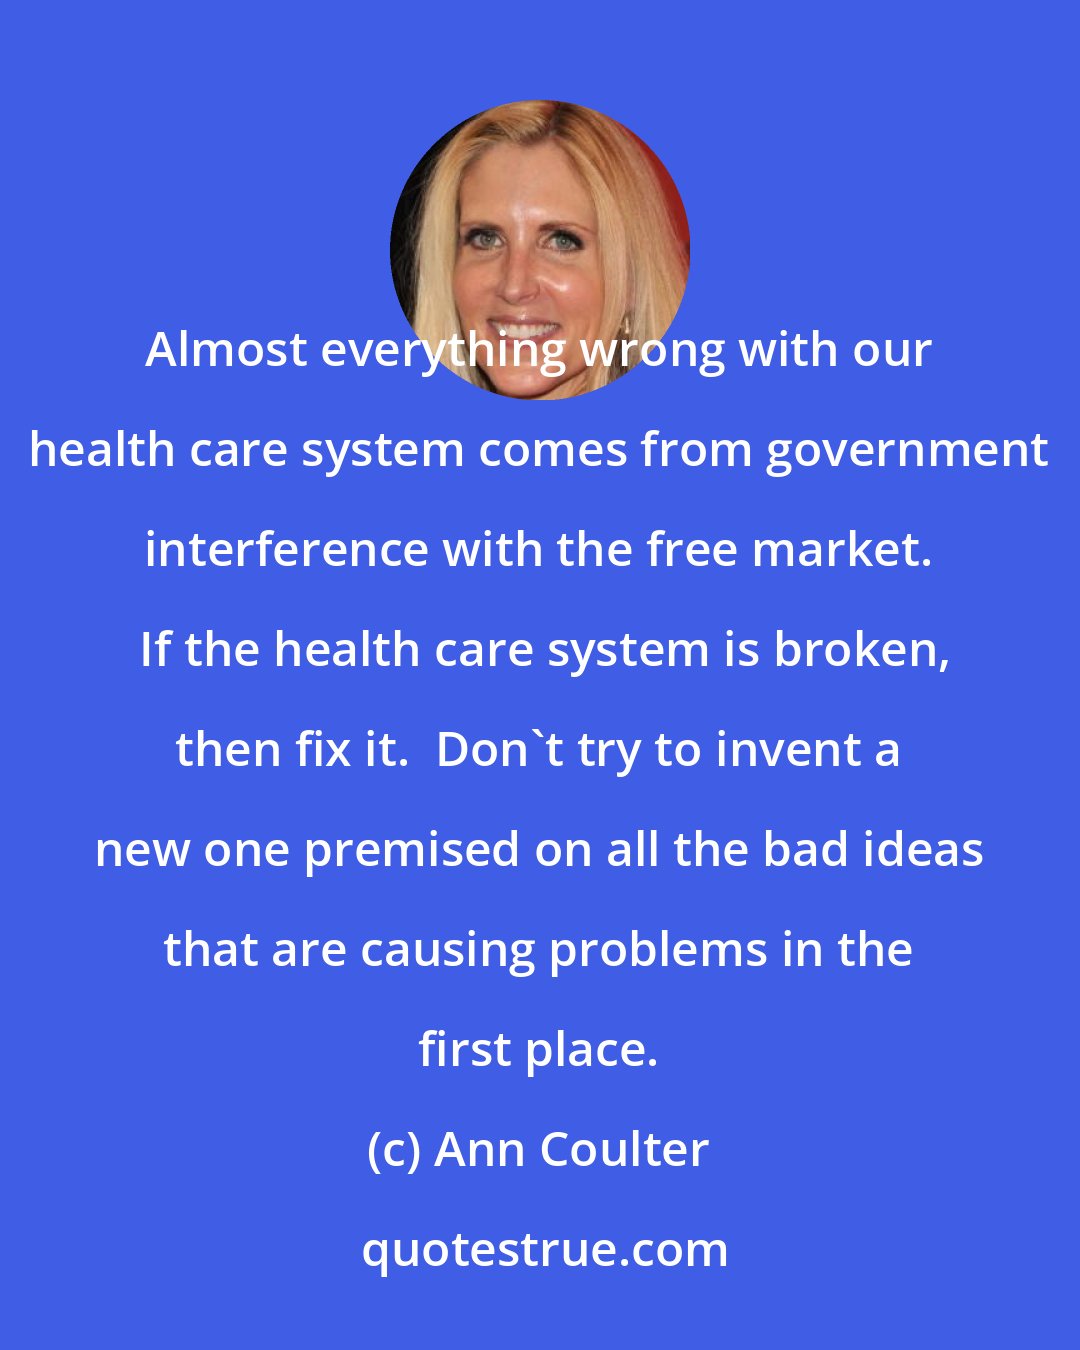 Ann Coulter: Almost everything wrong with our health care system comes from government interference with the free market.  If the health care system is broken, then fix it.  Don't try to invent a new one premised on all the bad ideas that are causing problems in the first place.